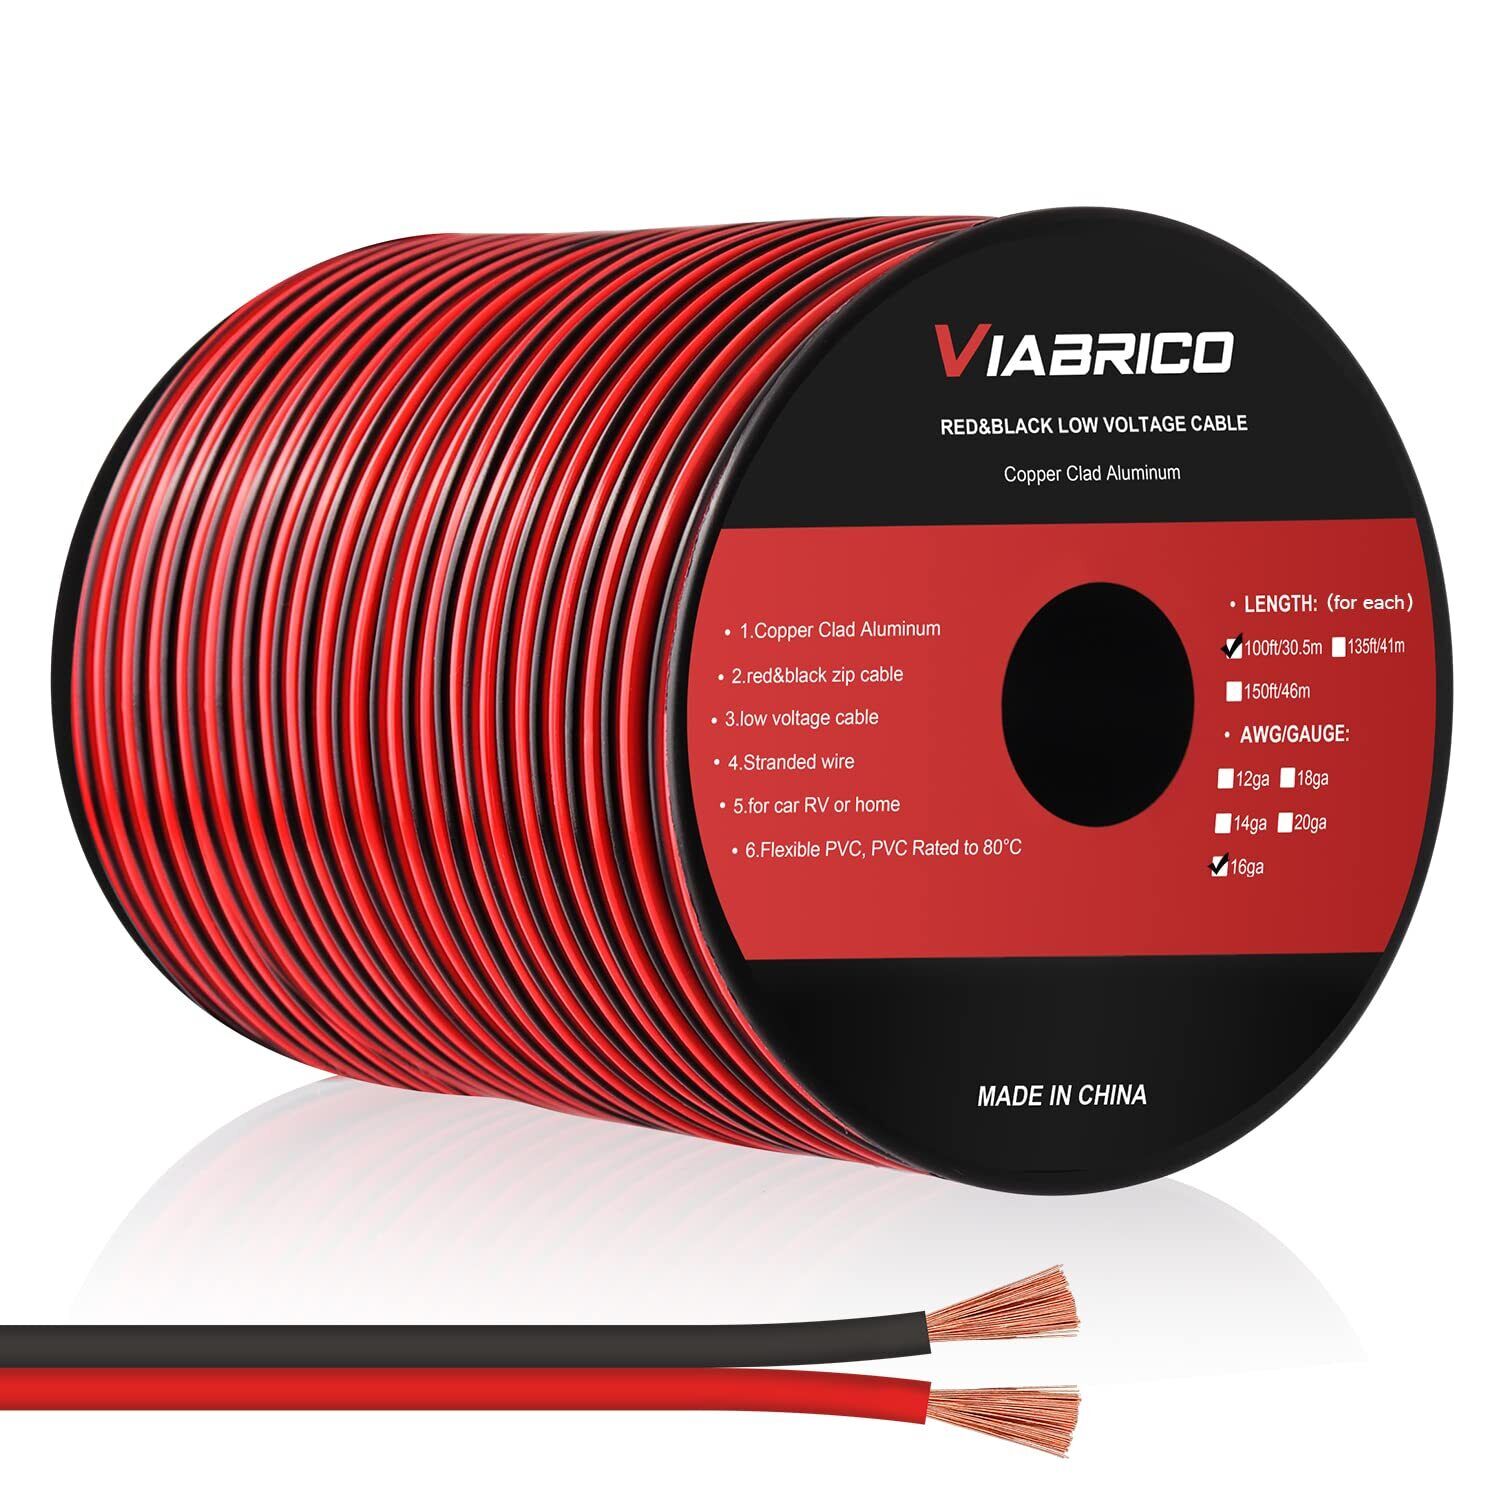 16 Gauge Wire 16awg Automotive Wire Electrical Wire 100ft 2 Conductor Red Black